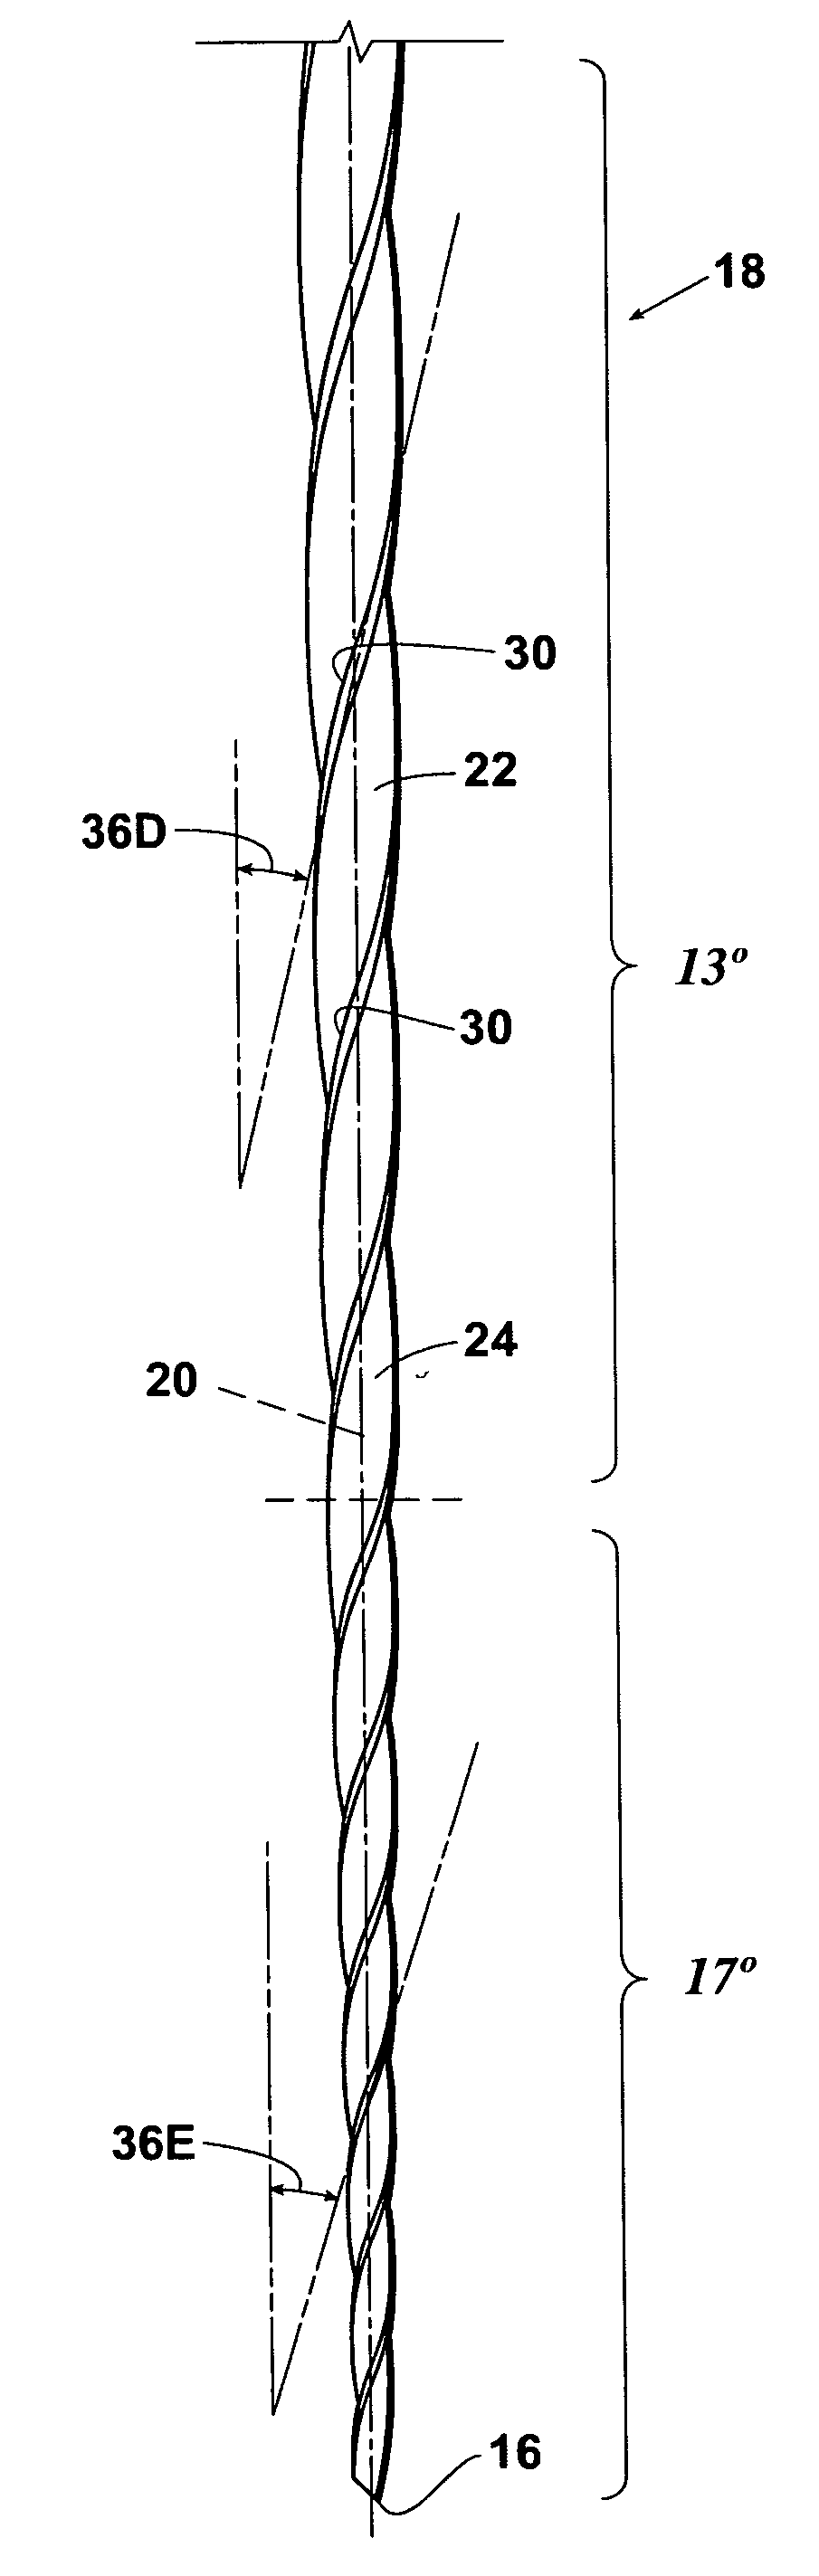 Endodontic files having variable helical angle flutes